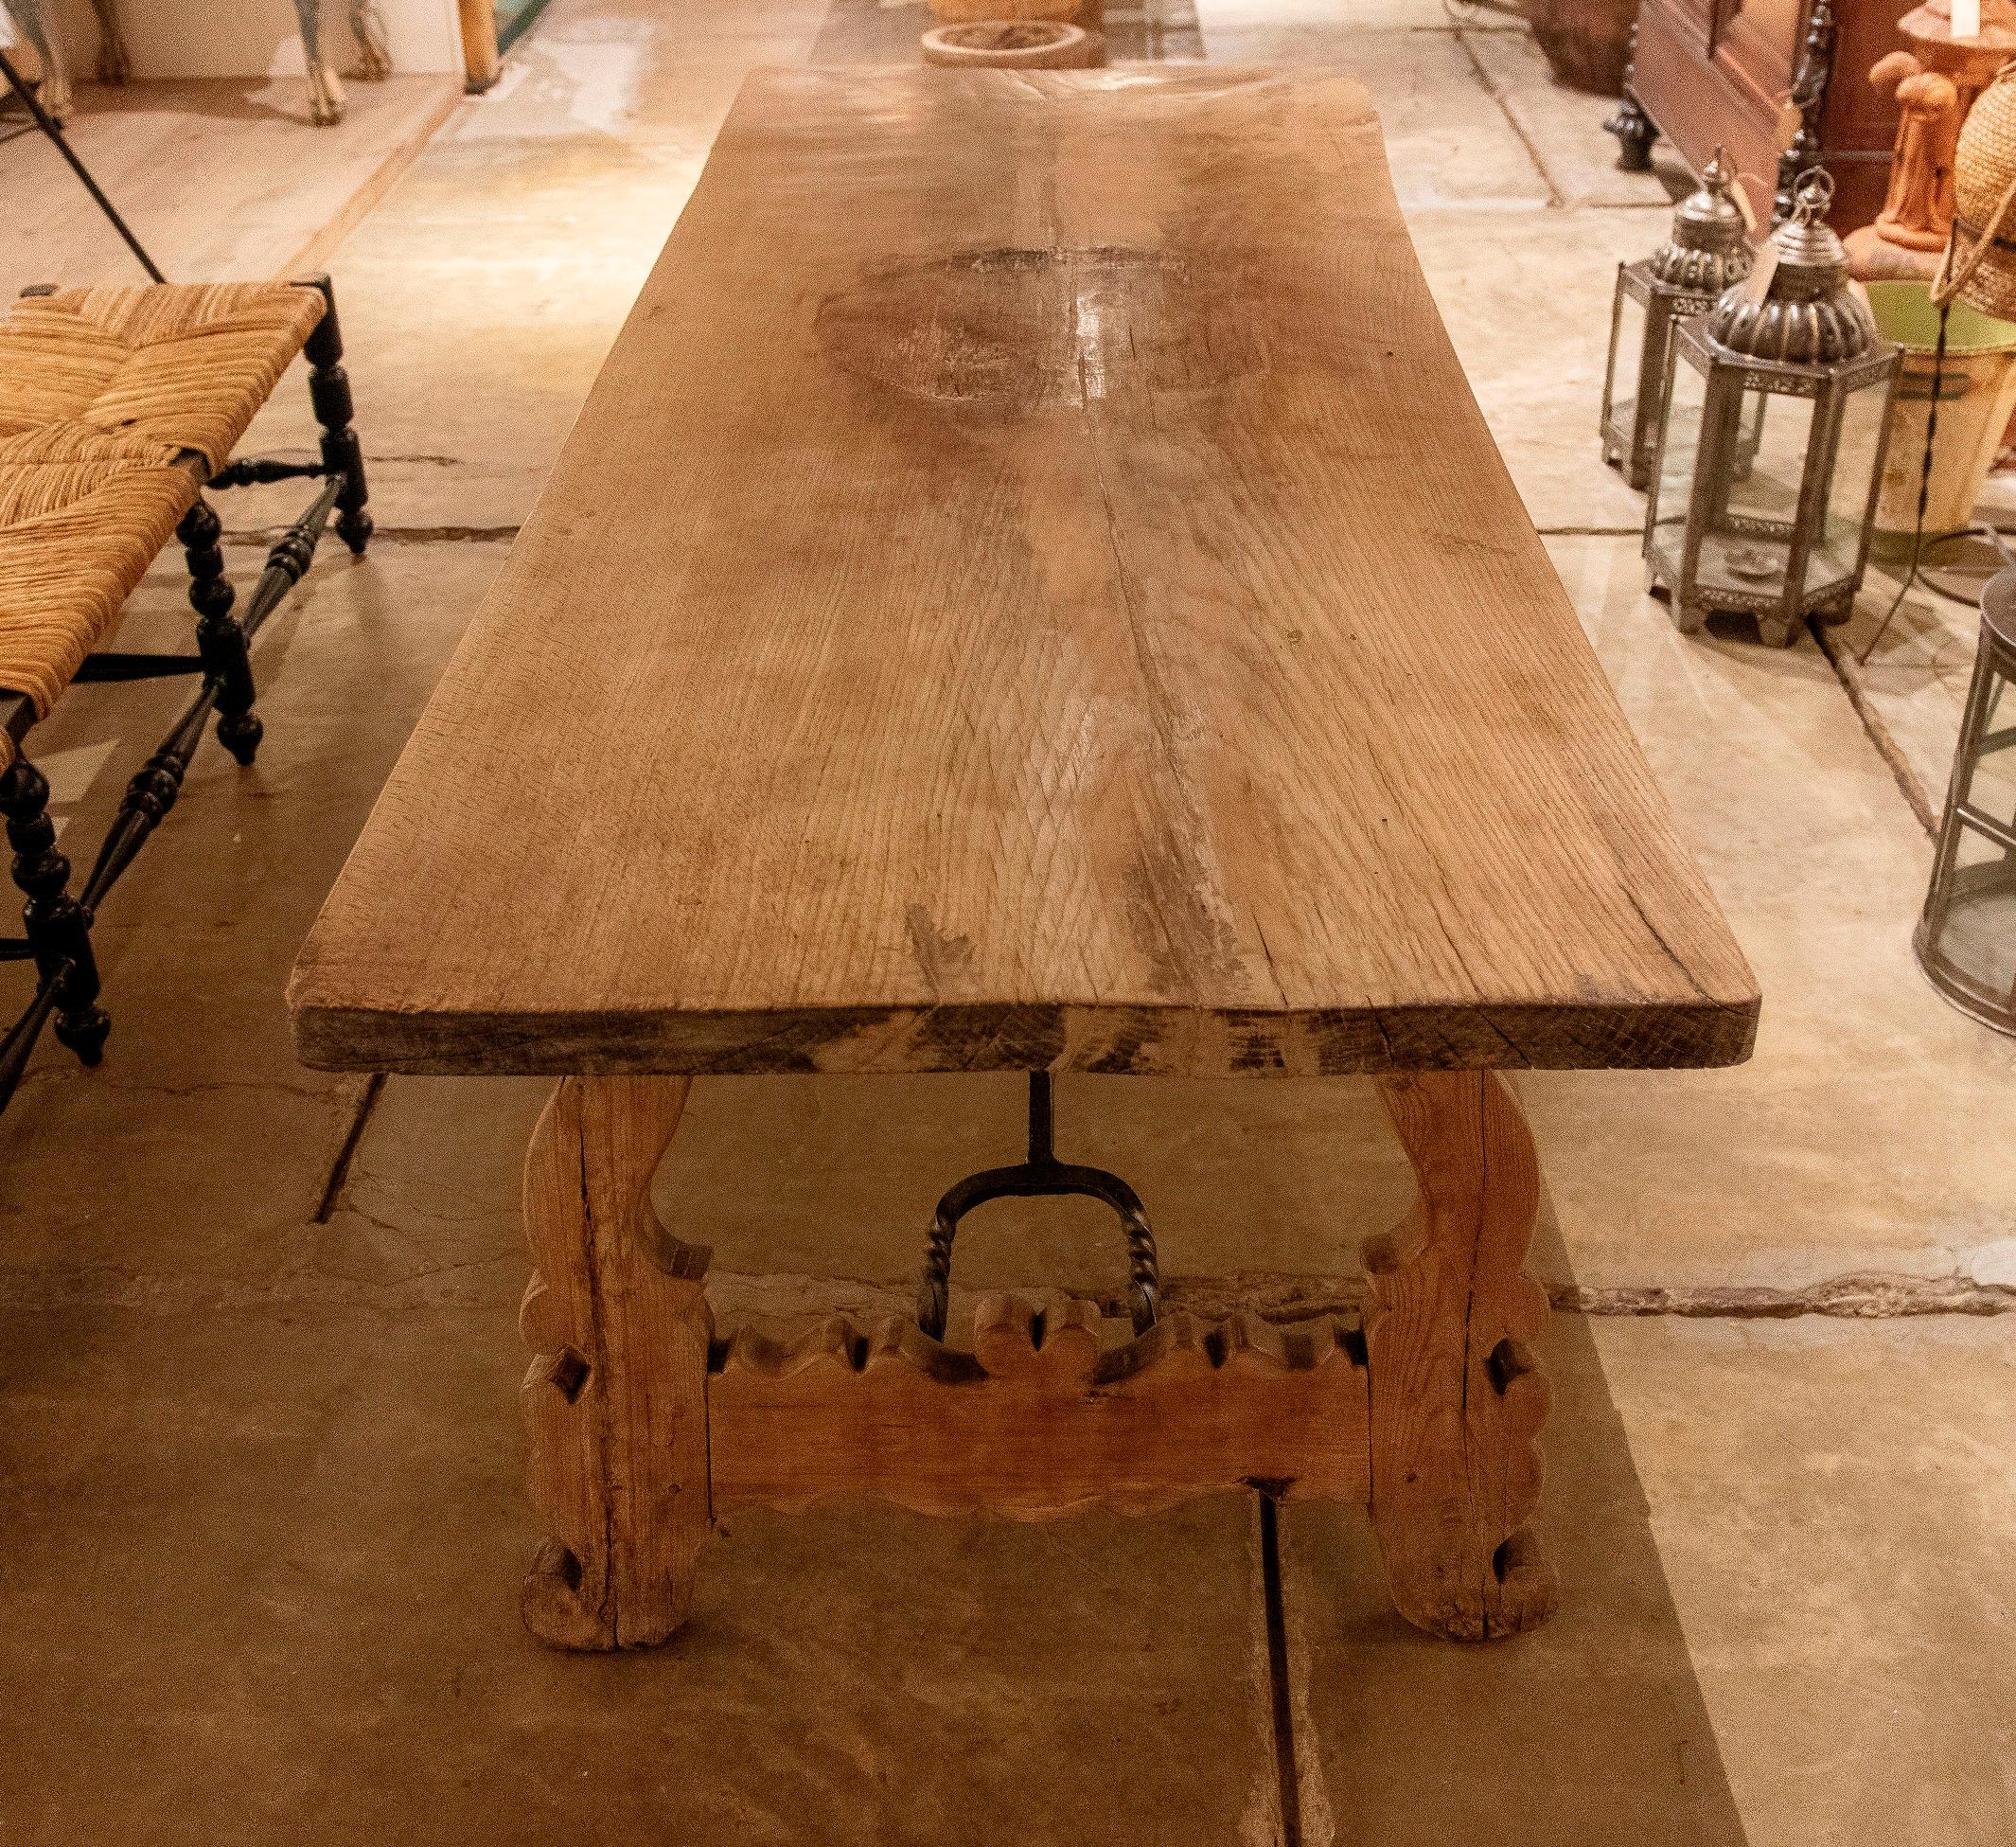 Spanish Large Wooden Table with Hand-Carved Legs and Original Iron Fittings For Sale 7